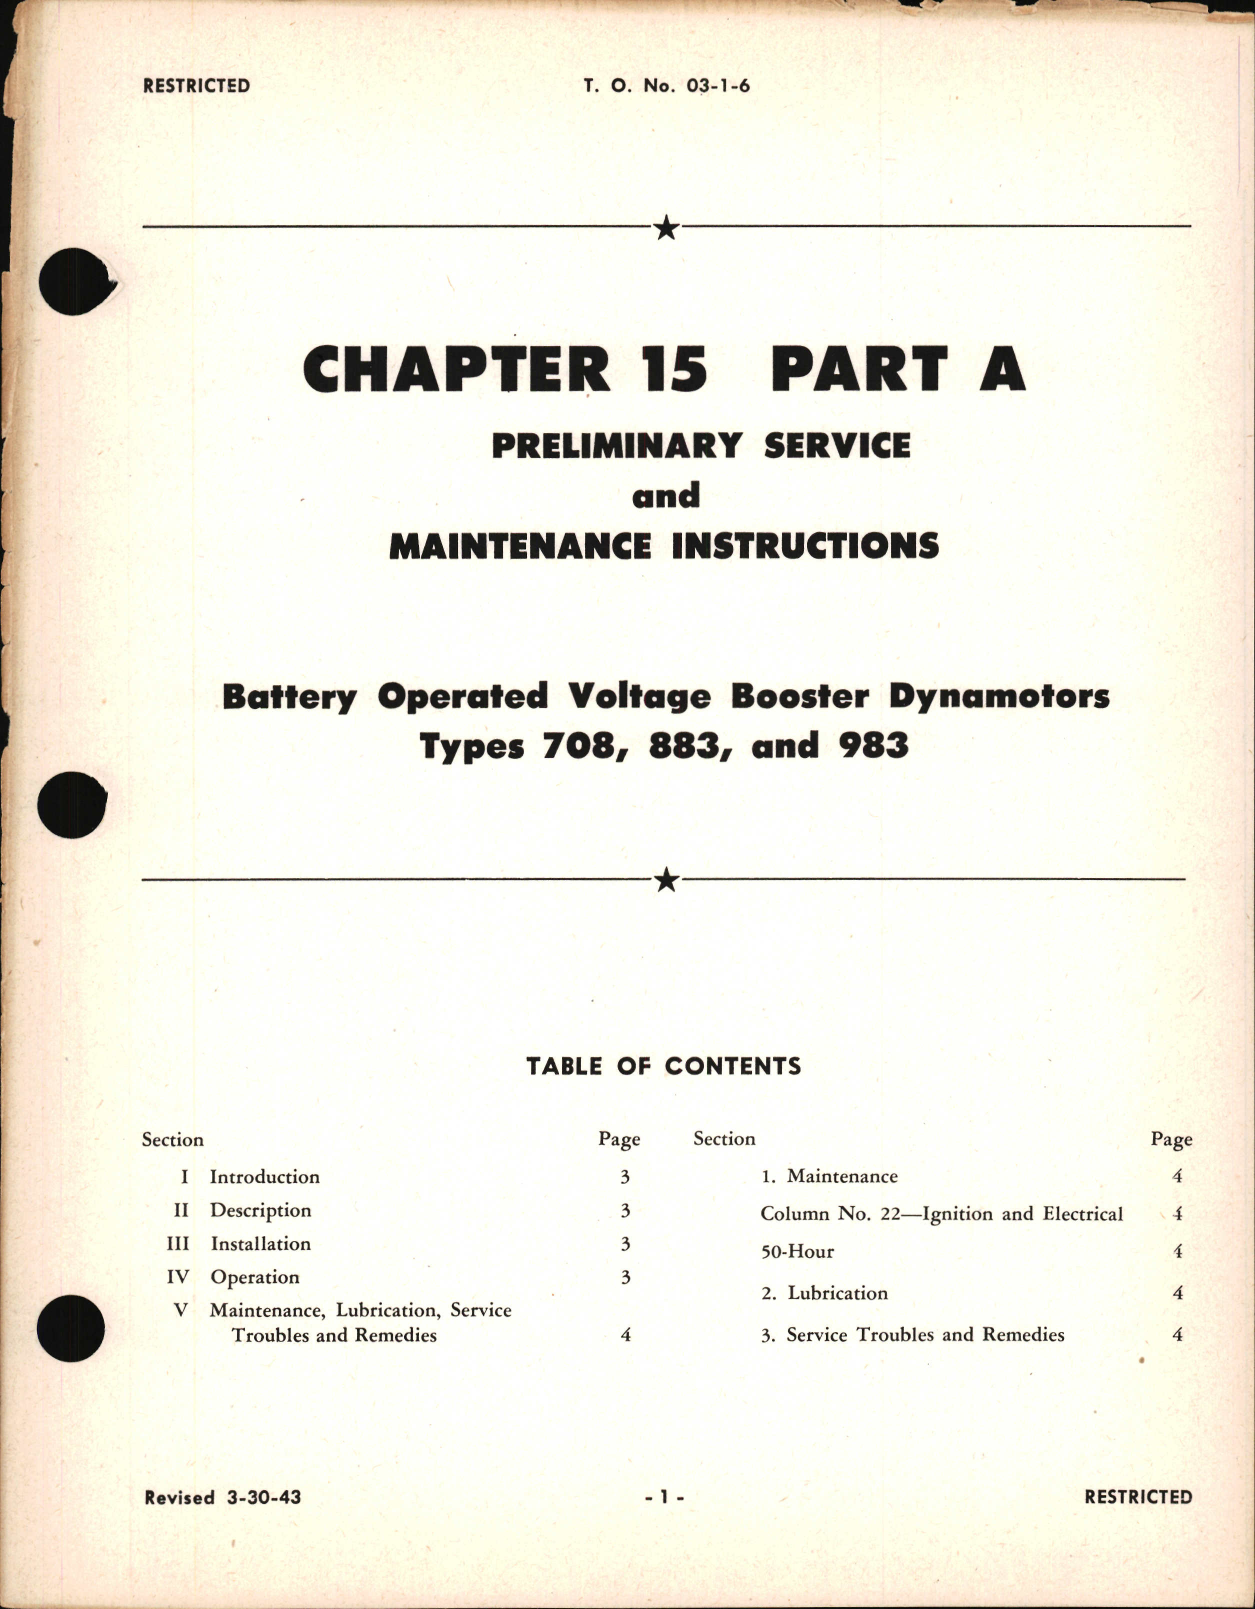 Sample page 1 from AirCorps Library document: Preliminary Service and Maintenance Instructions for Battery Operated Voltage Booster Dynamotors